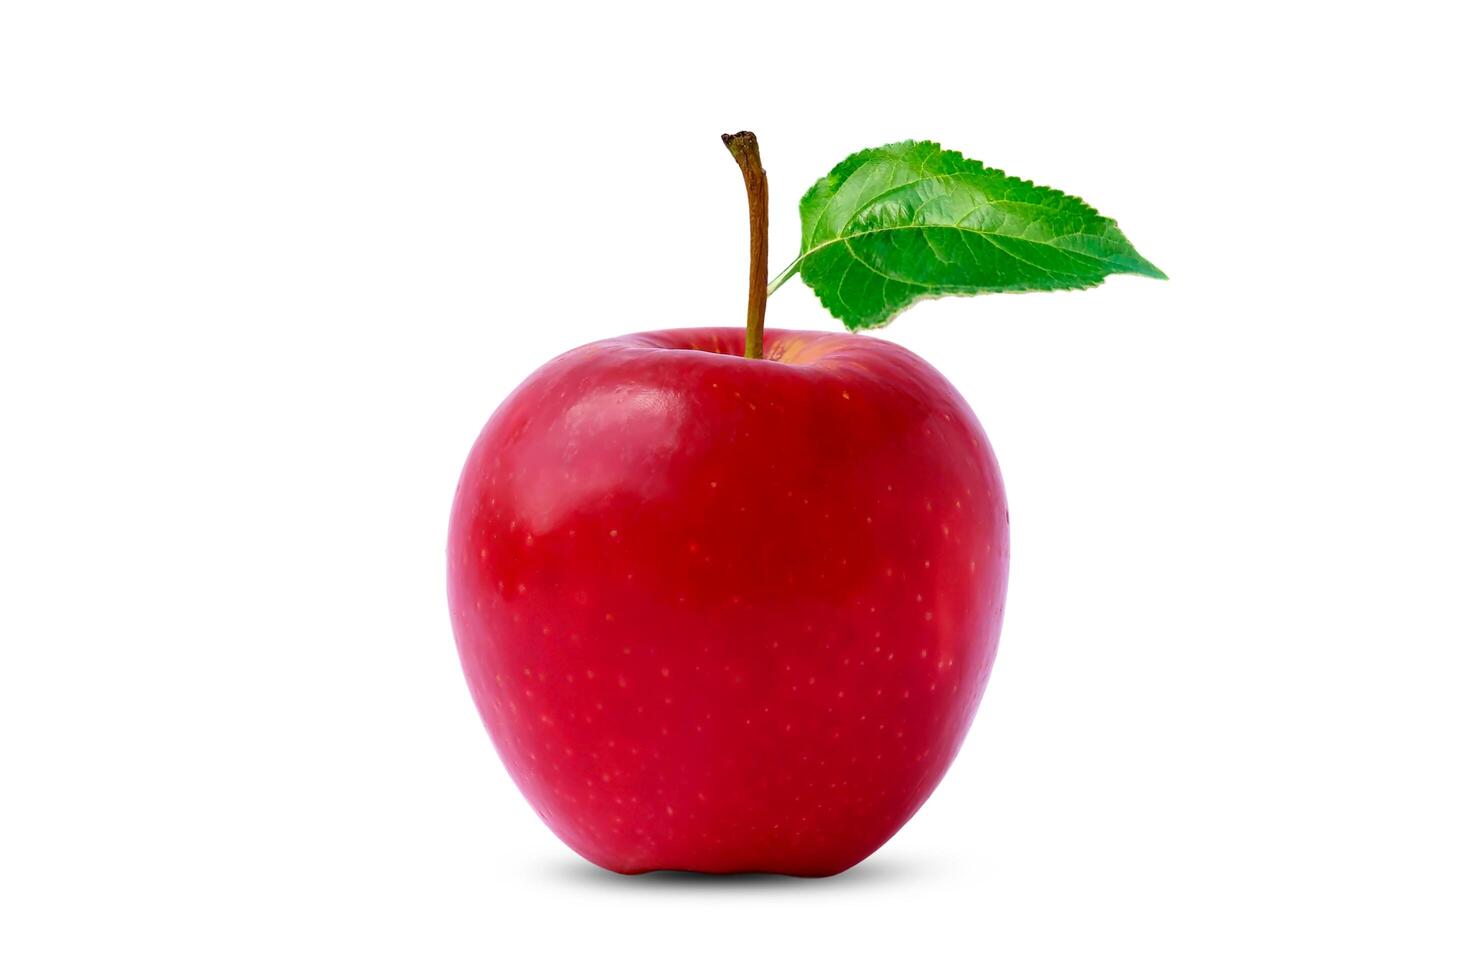 https://static.vecteezy.com/system/resources/previews/001/995/529/non_2x/red-apples-and-green-leaves-isolated-on-a-white-background-with-the-clipping-path-free-photo.jpg